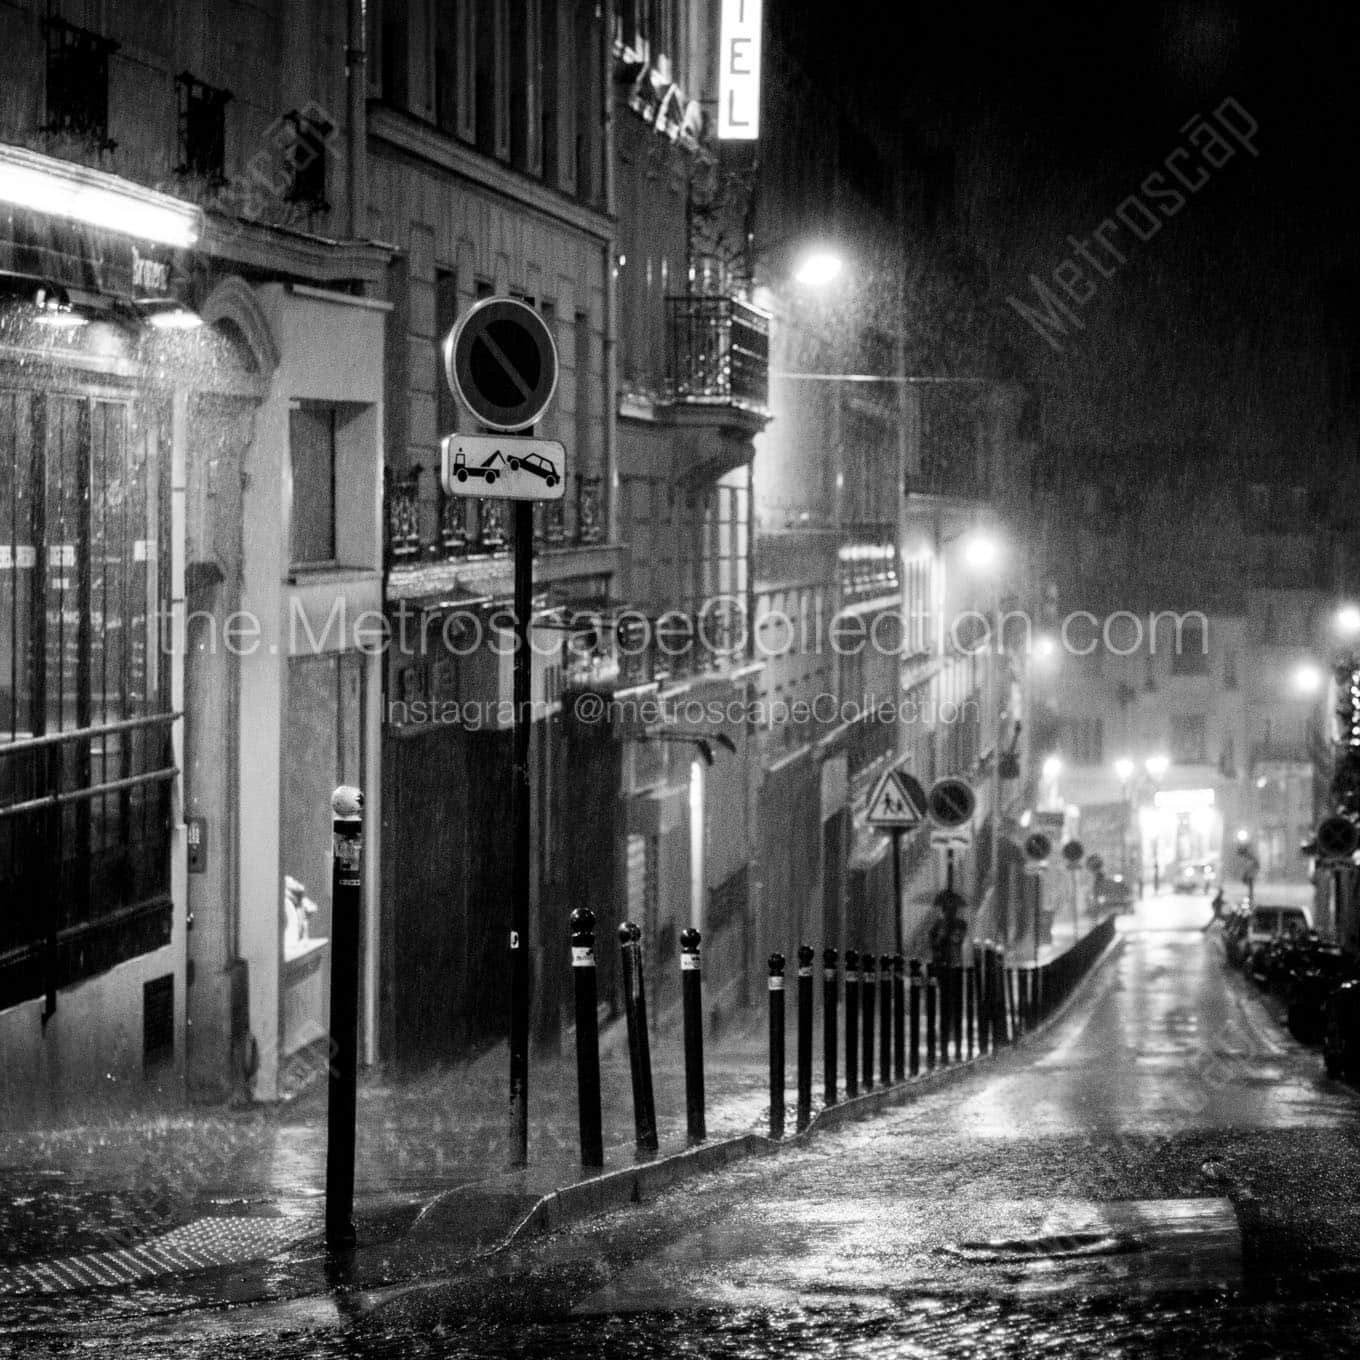 rue abbesses in pouring rain at night Black & White Office Art